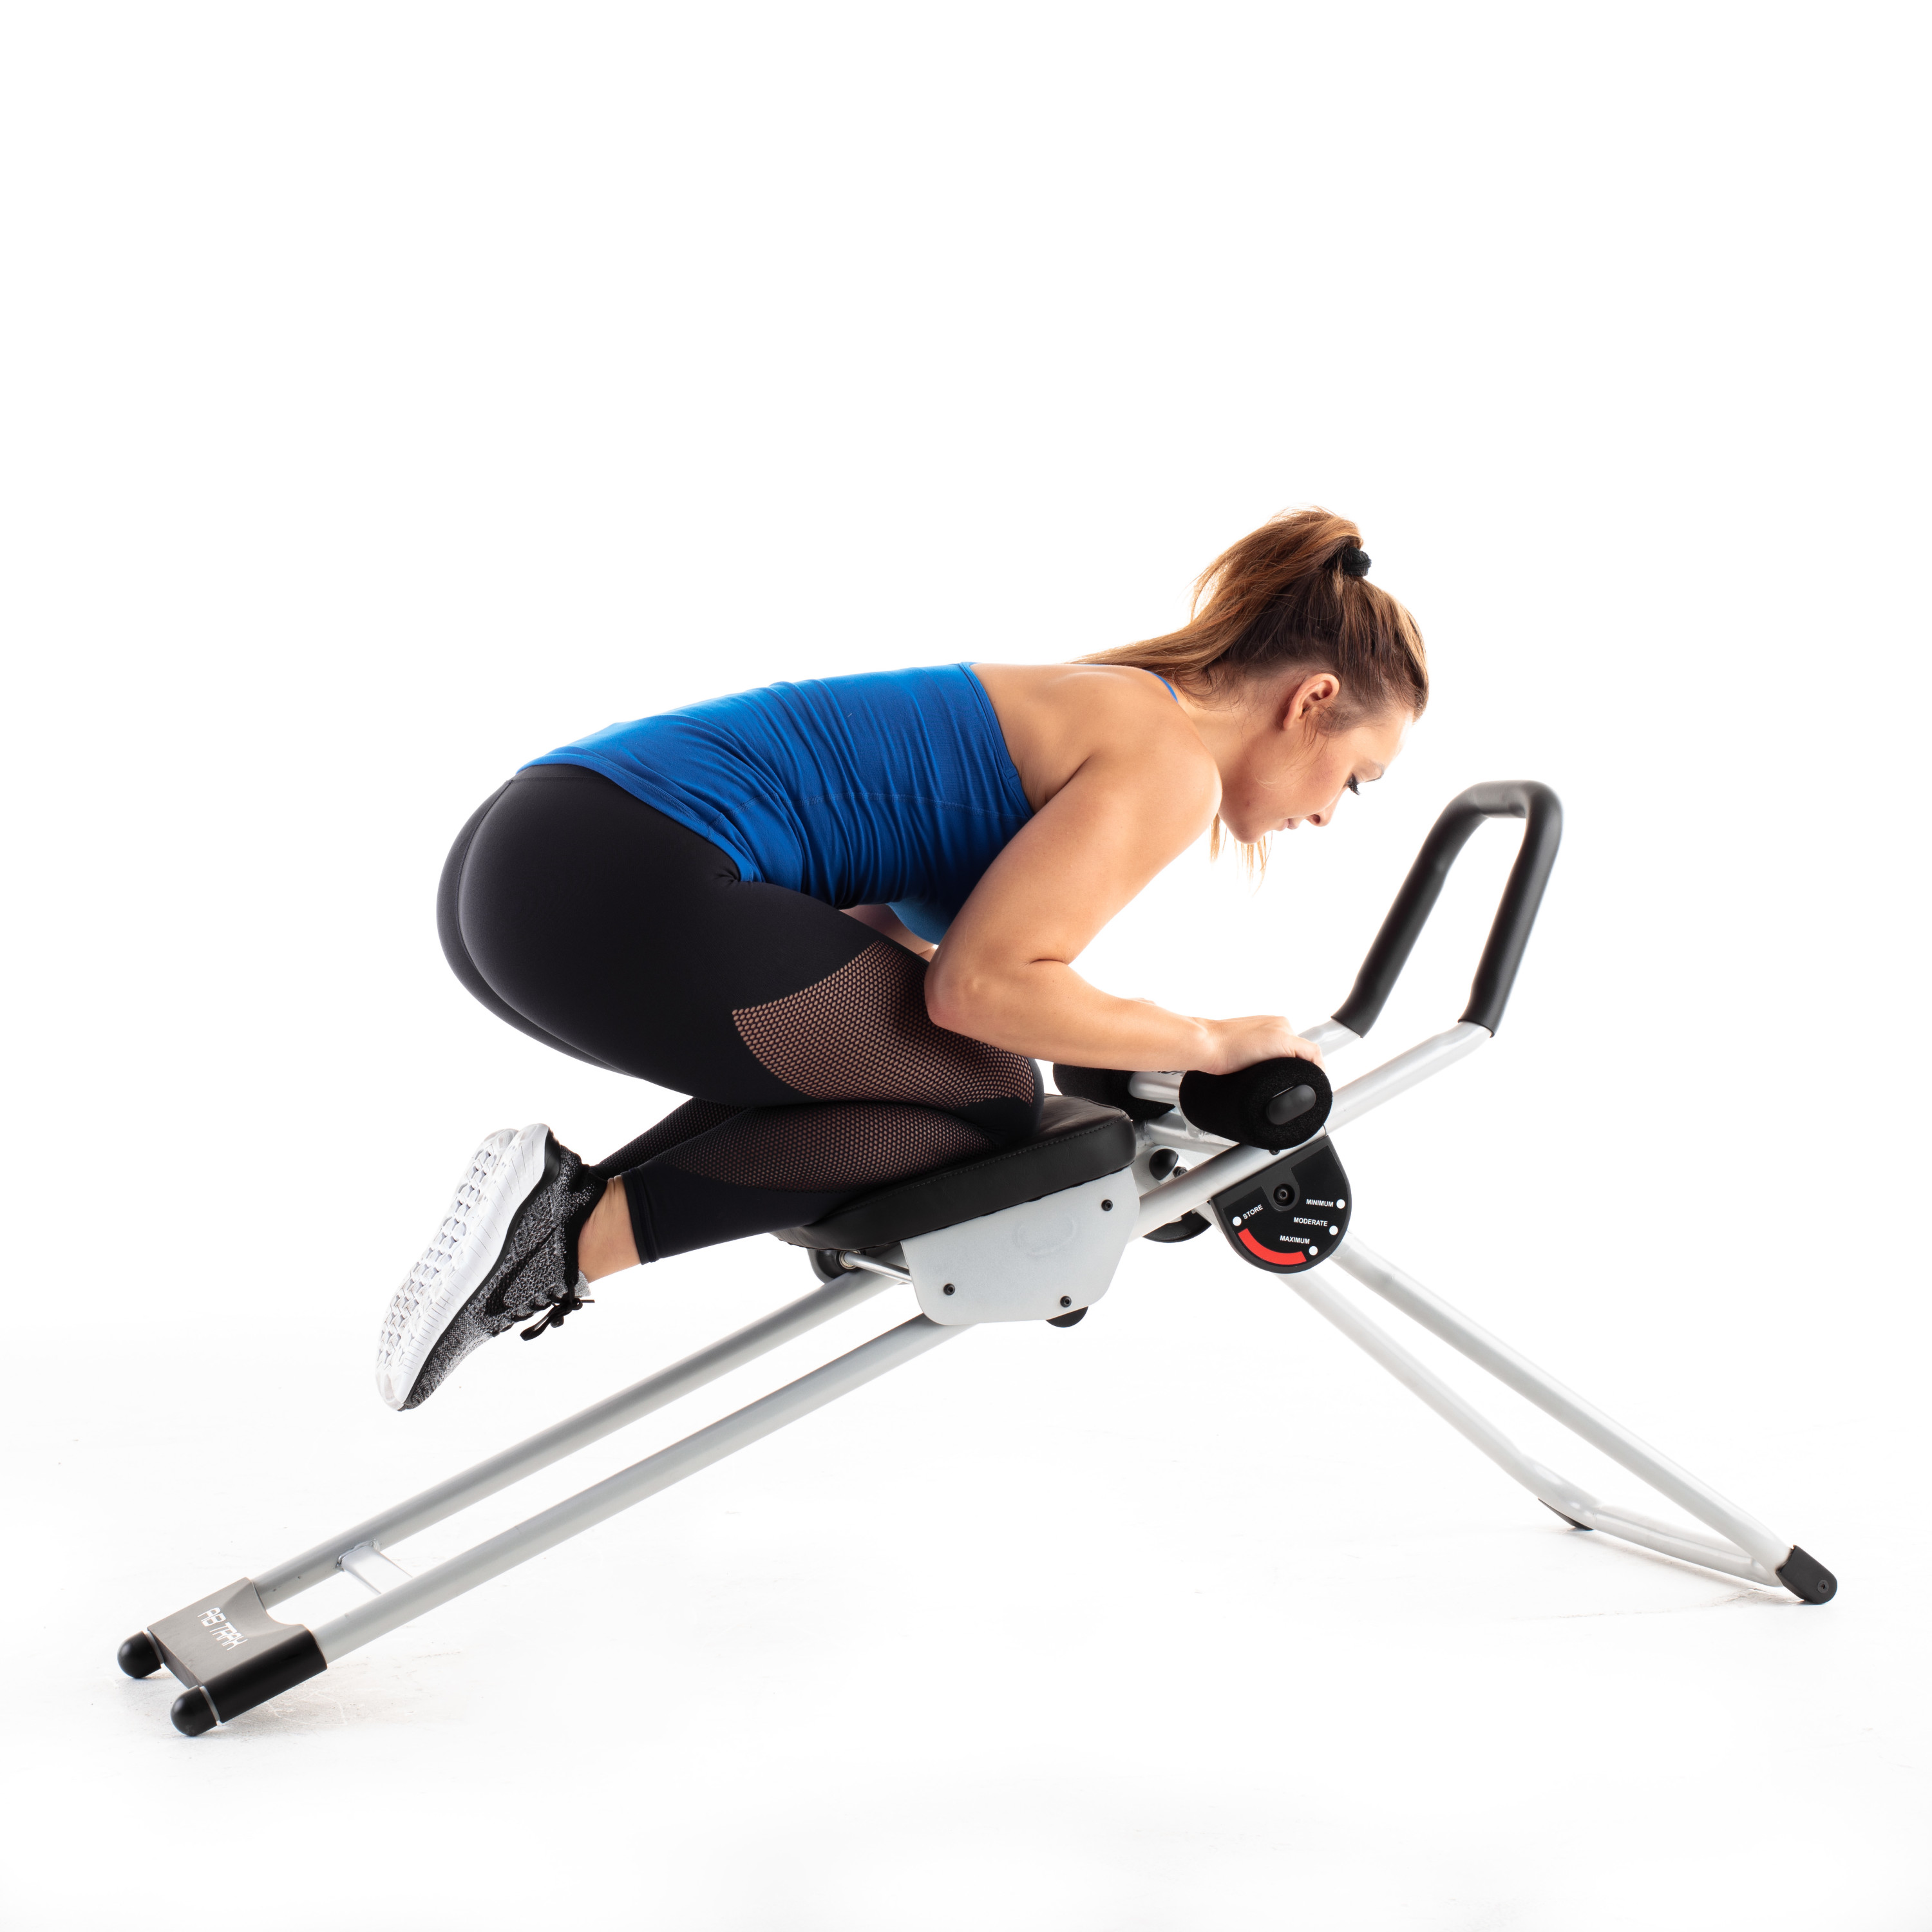 ProForm Ab Trax Core Trainer with Included Exercise Chart and SpaceSaver Design - image 10 of 20